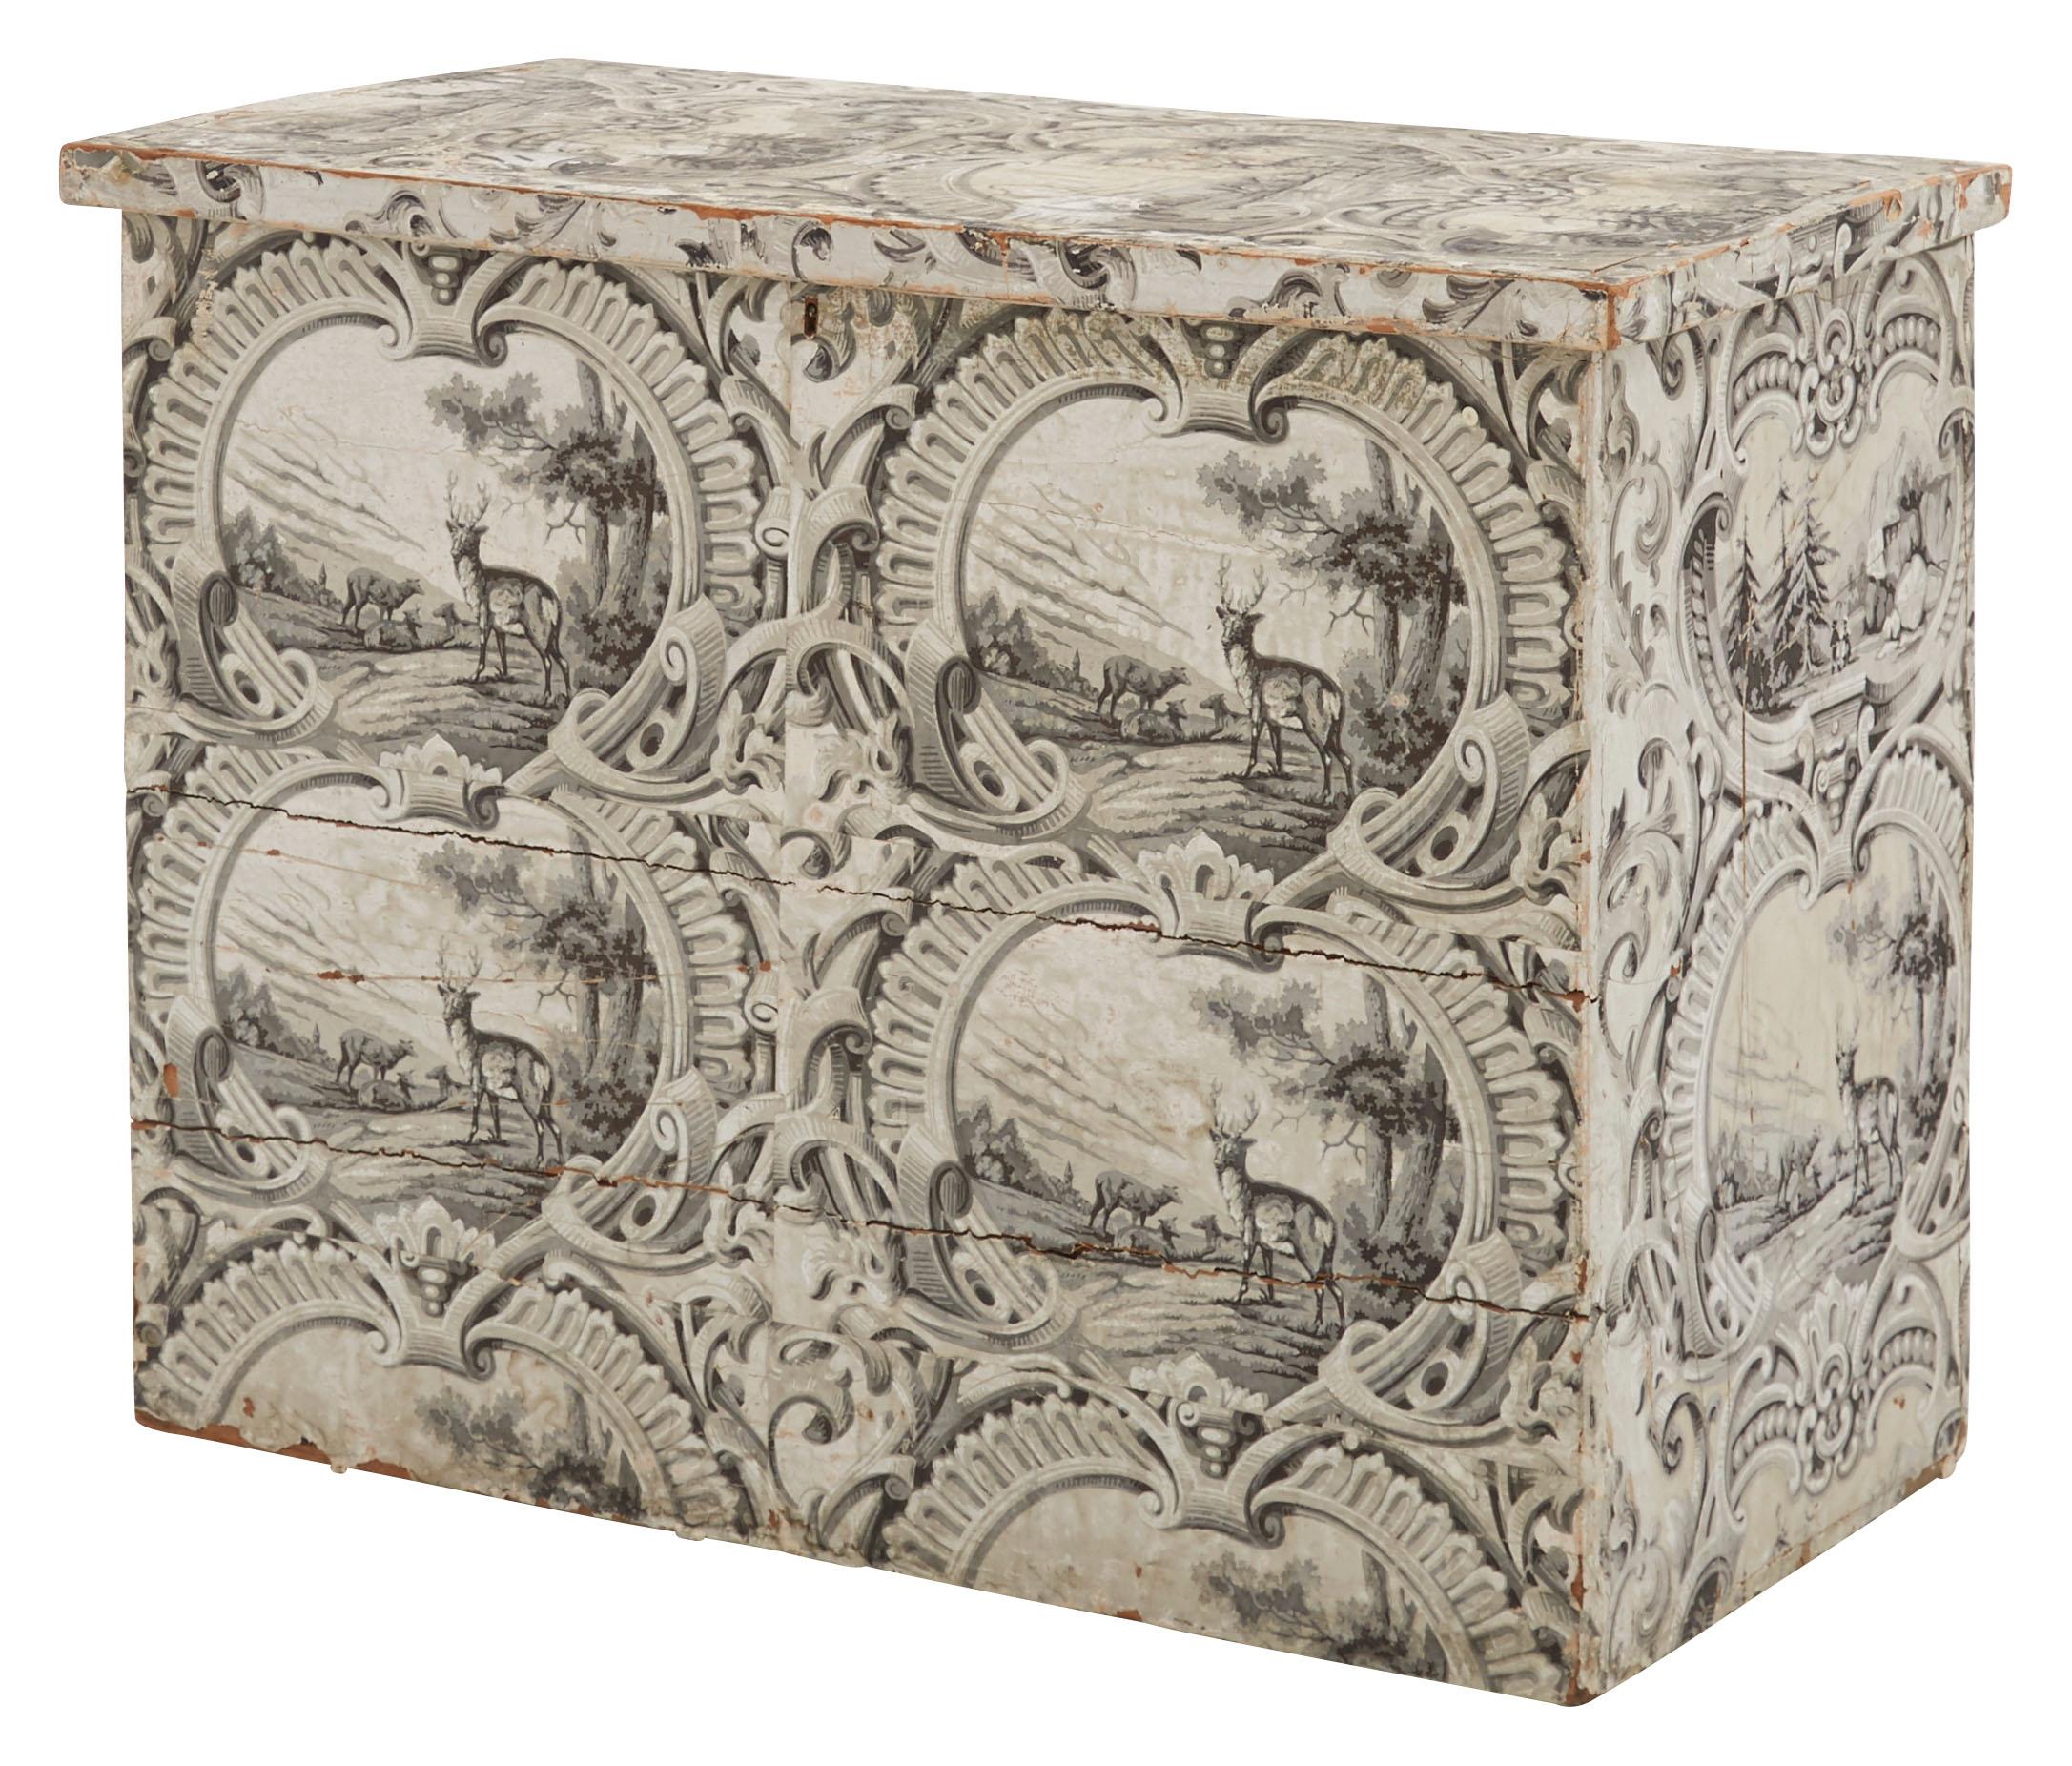 • Wood frame
• Interior and exterior covered in antique wallpaper
• 19th century
• American
• Measures: 36.75